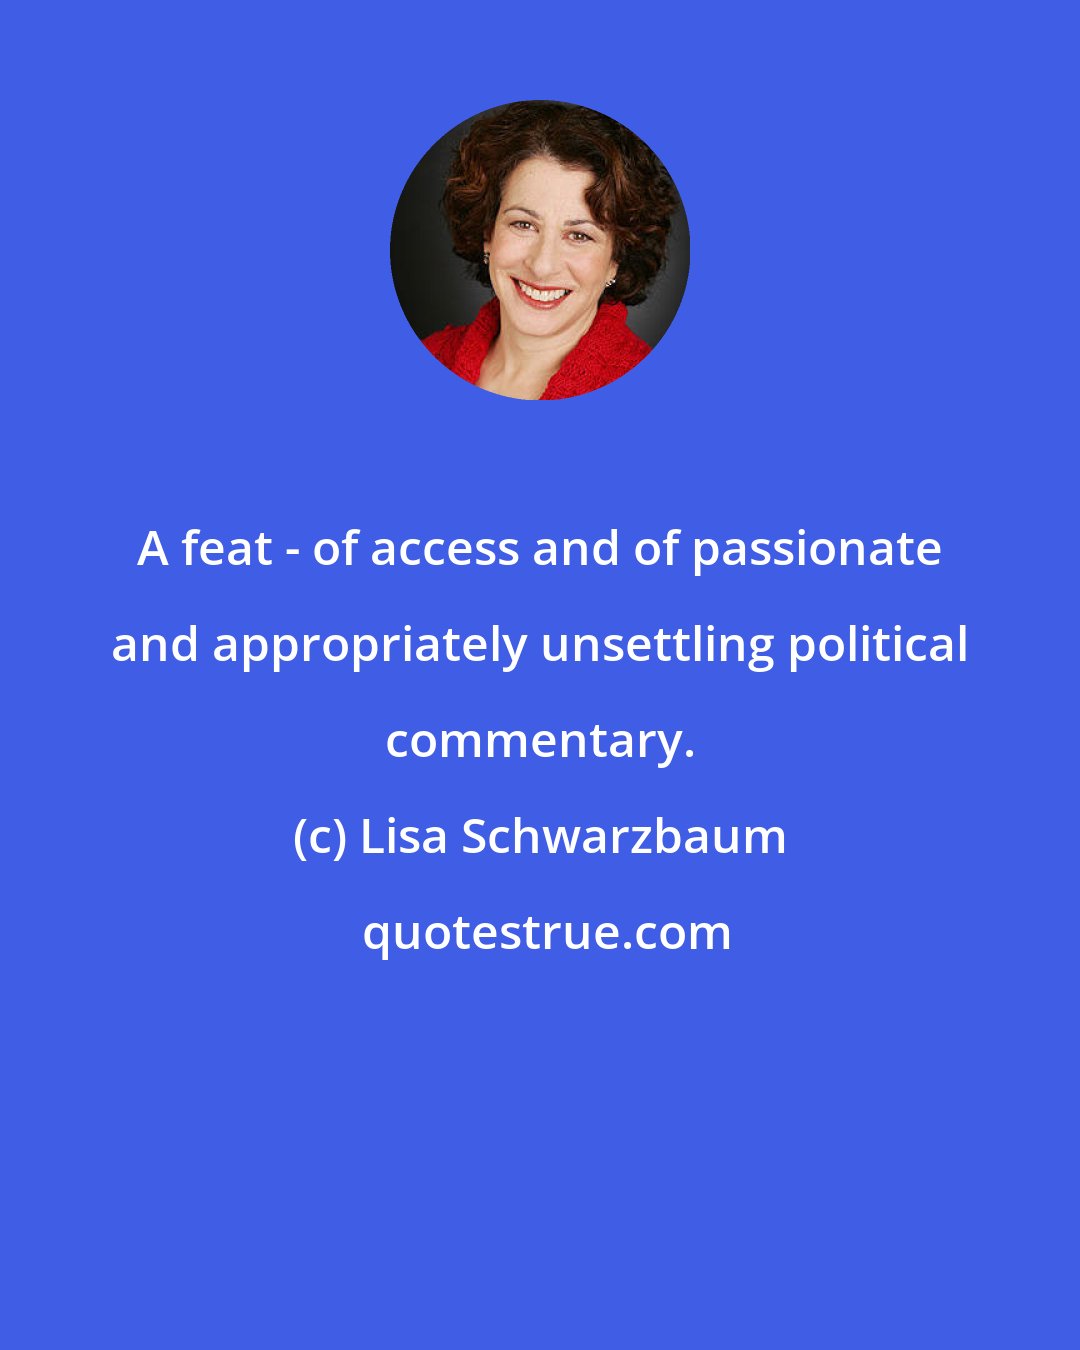 Lisa Schwarzbaum: A feat - of access and of passionate and appropriately unsettling political commentary.